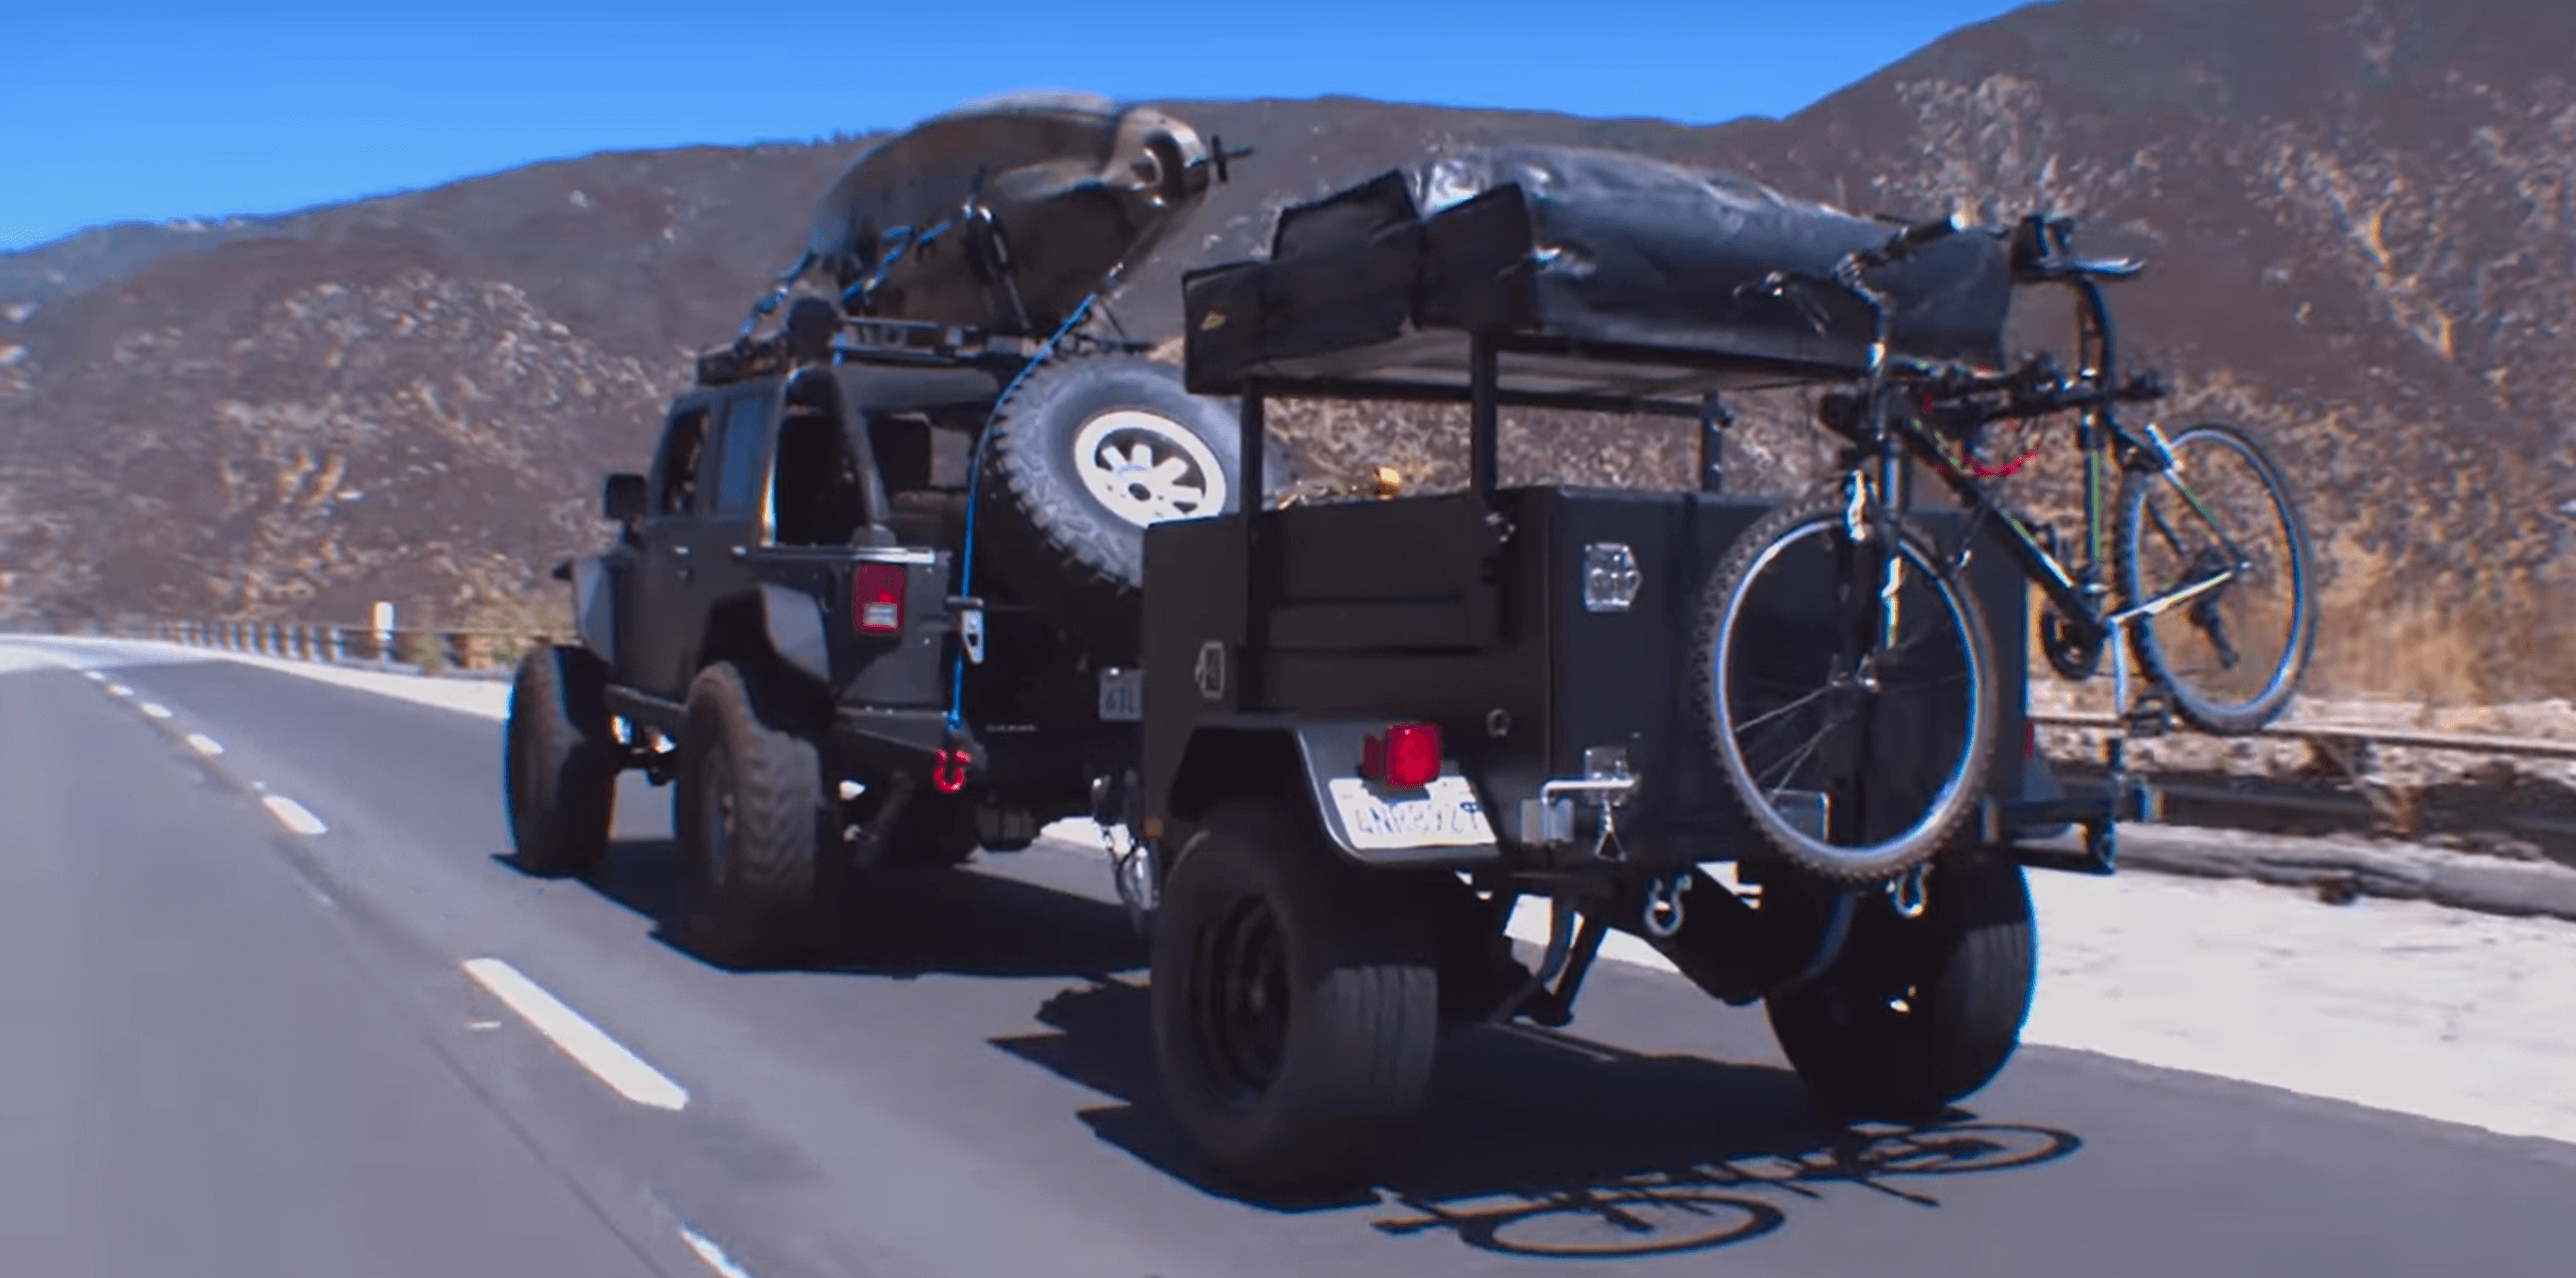 Smittybilt one of the best off-road camping trailers 2022 